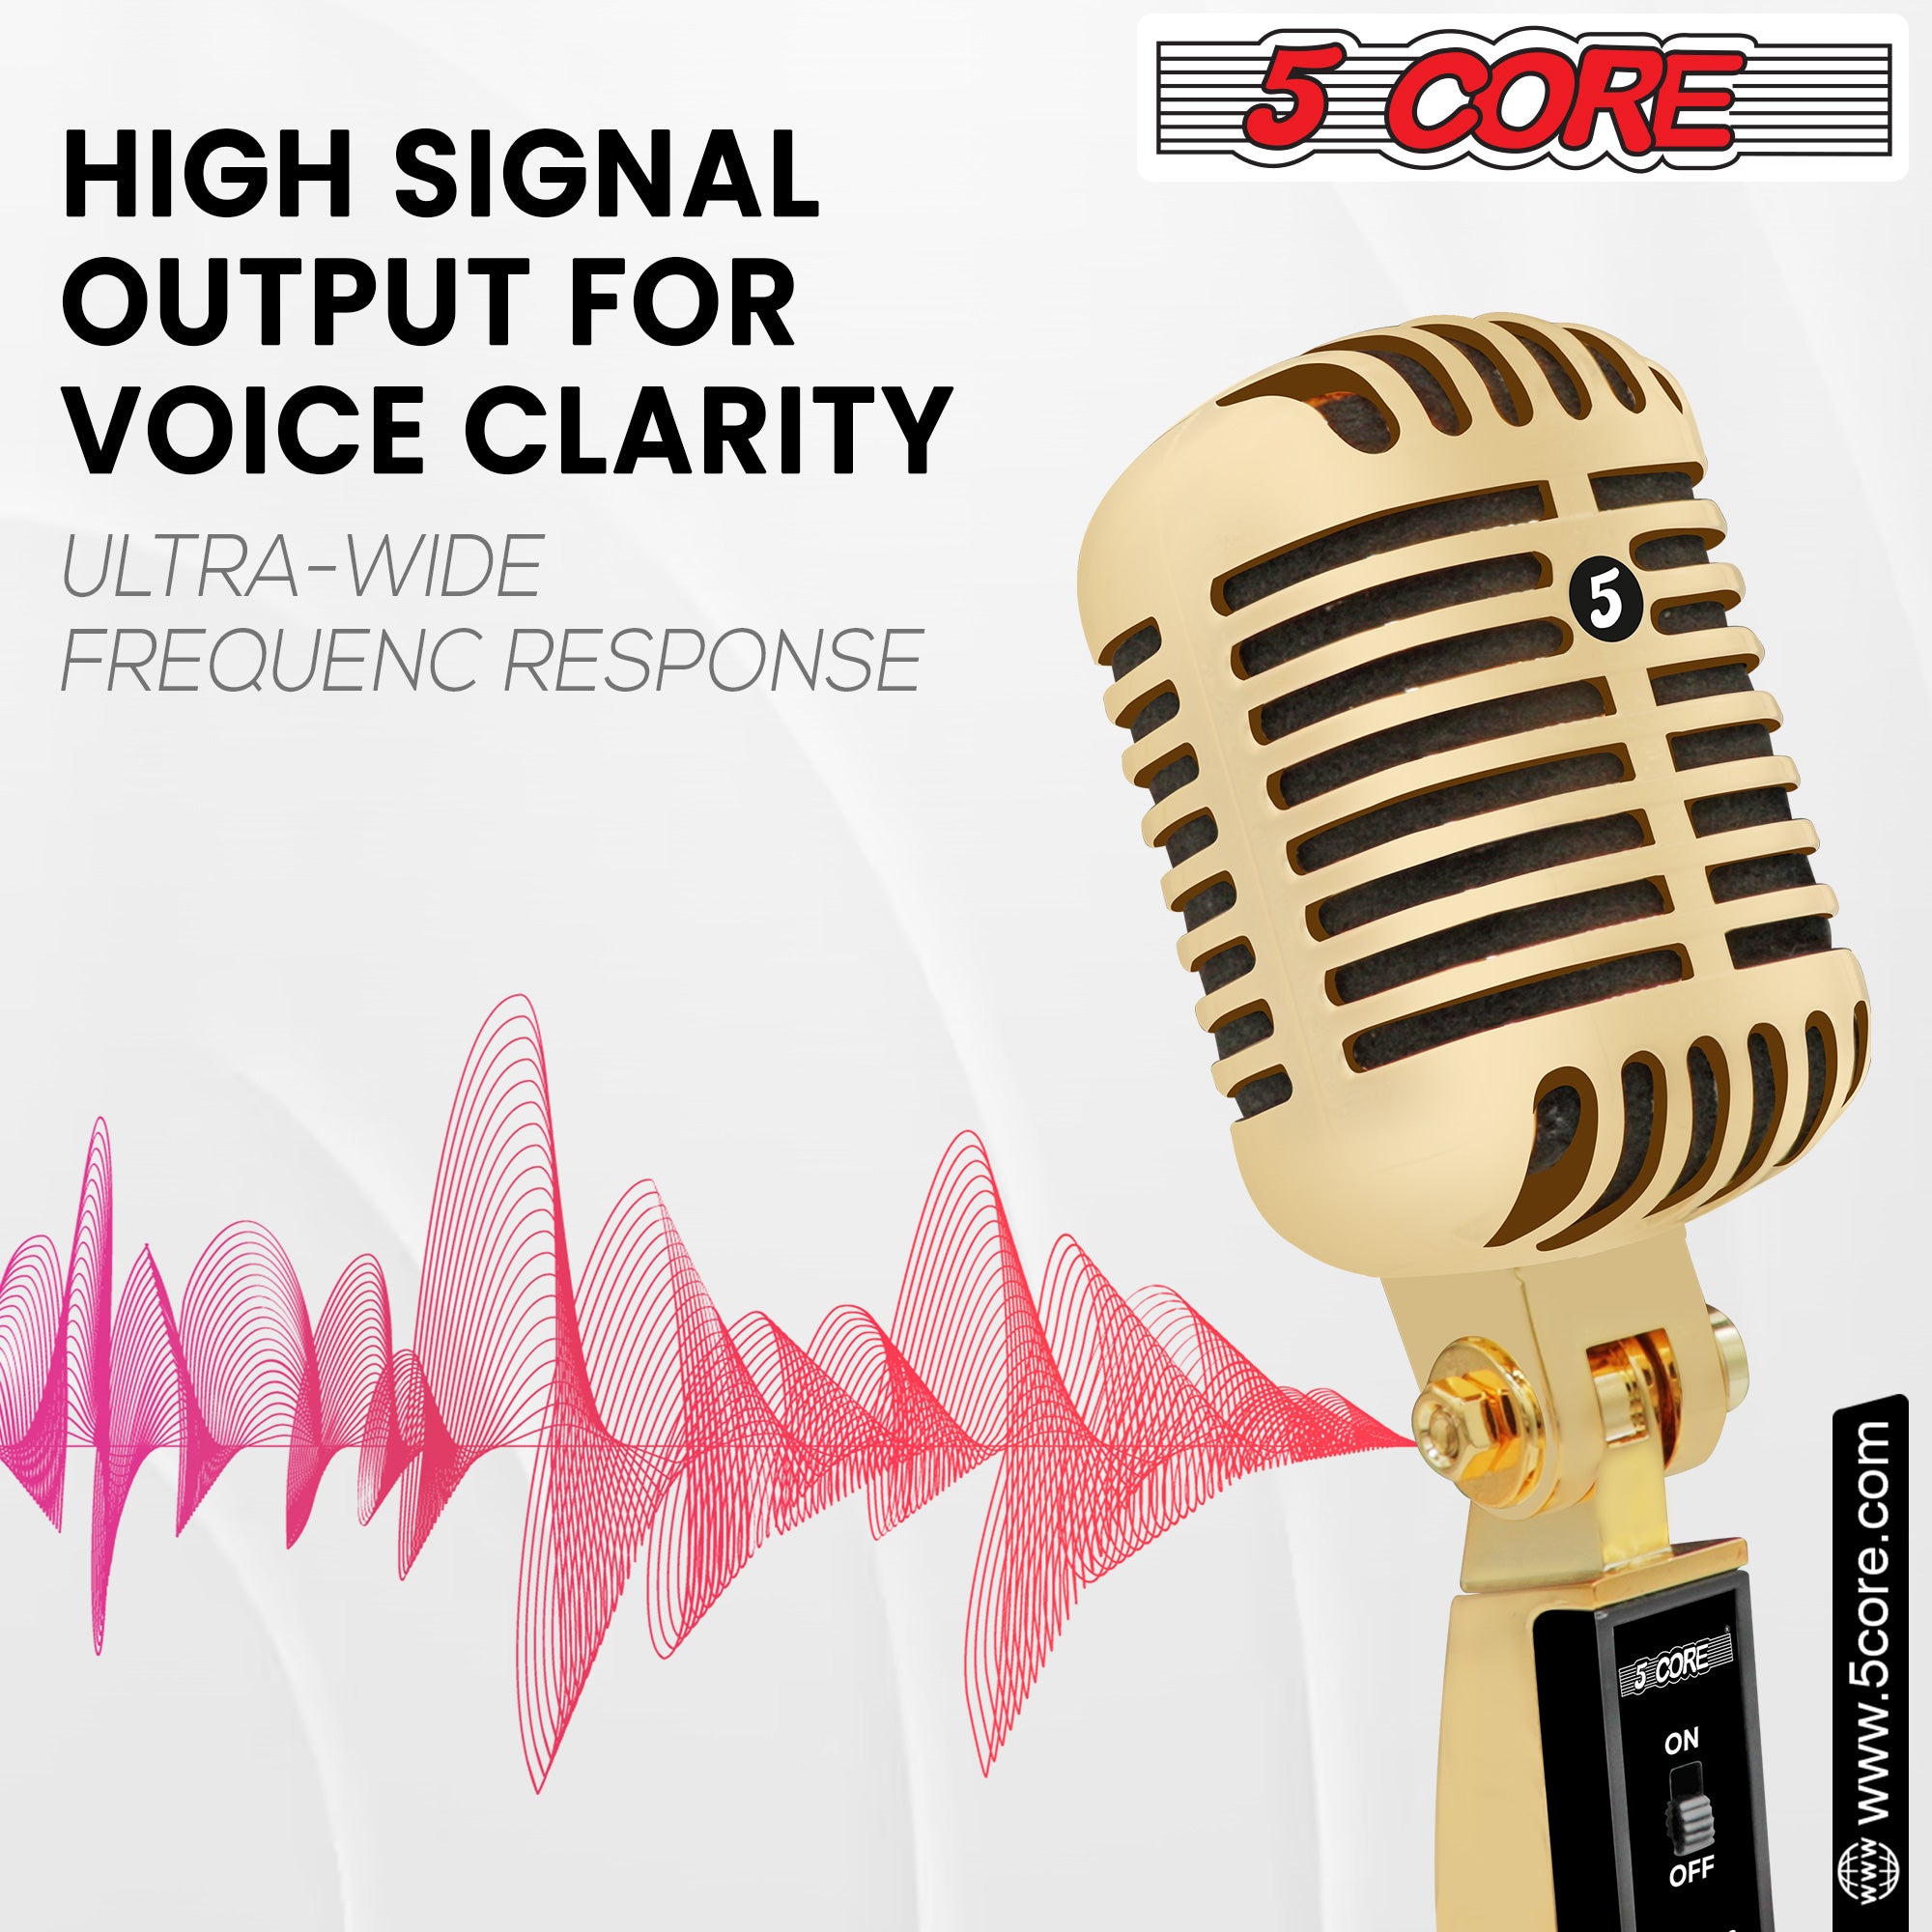 5Core Professional Vintage Microphone for Singing Dynamic Super Cardiod XLR Old Retro Wired Vocal Mic